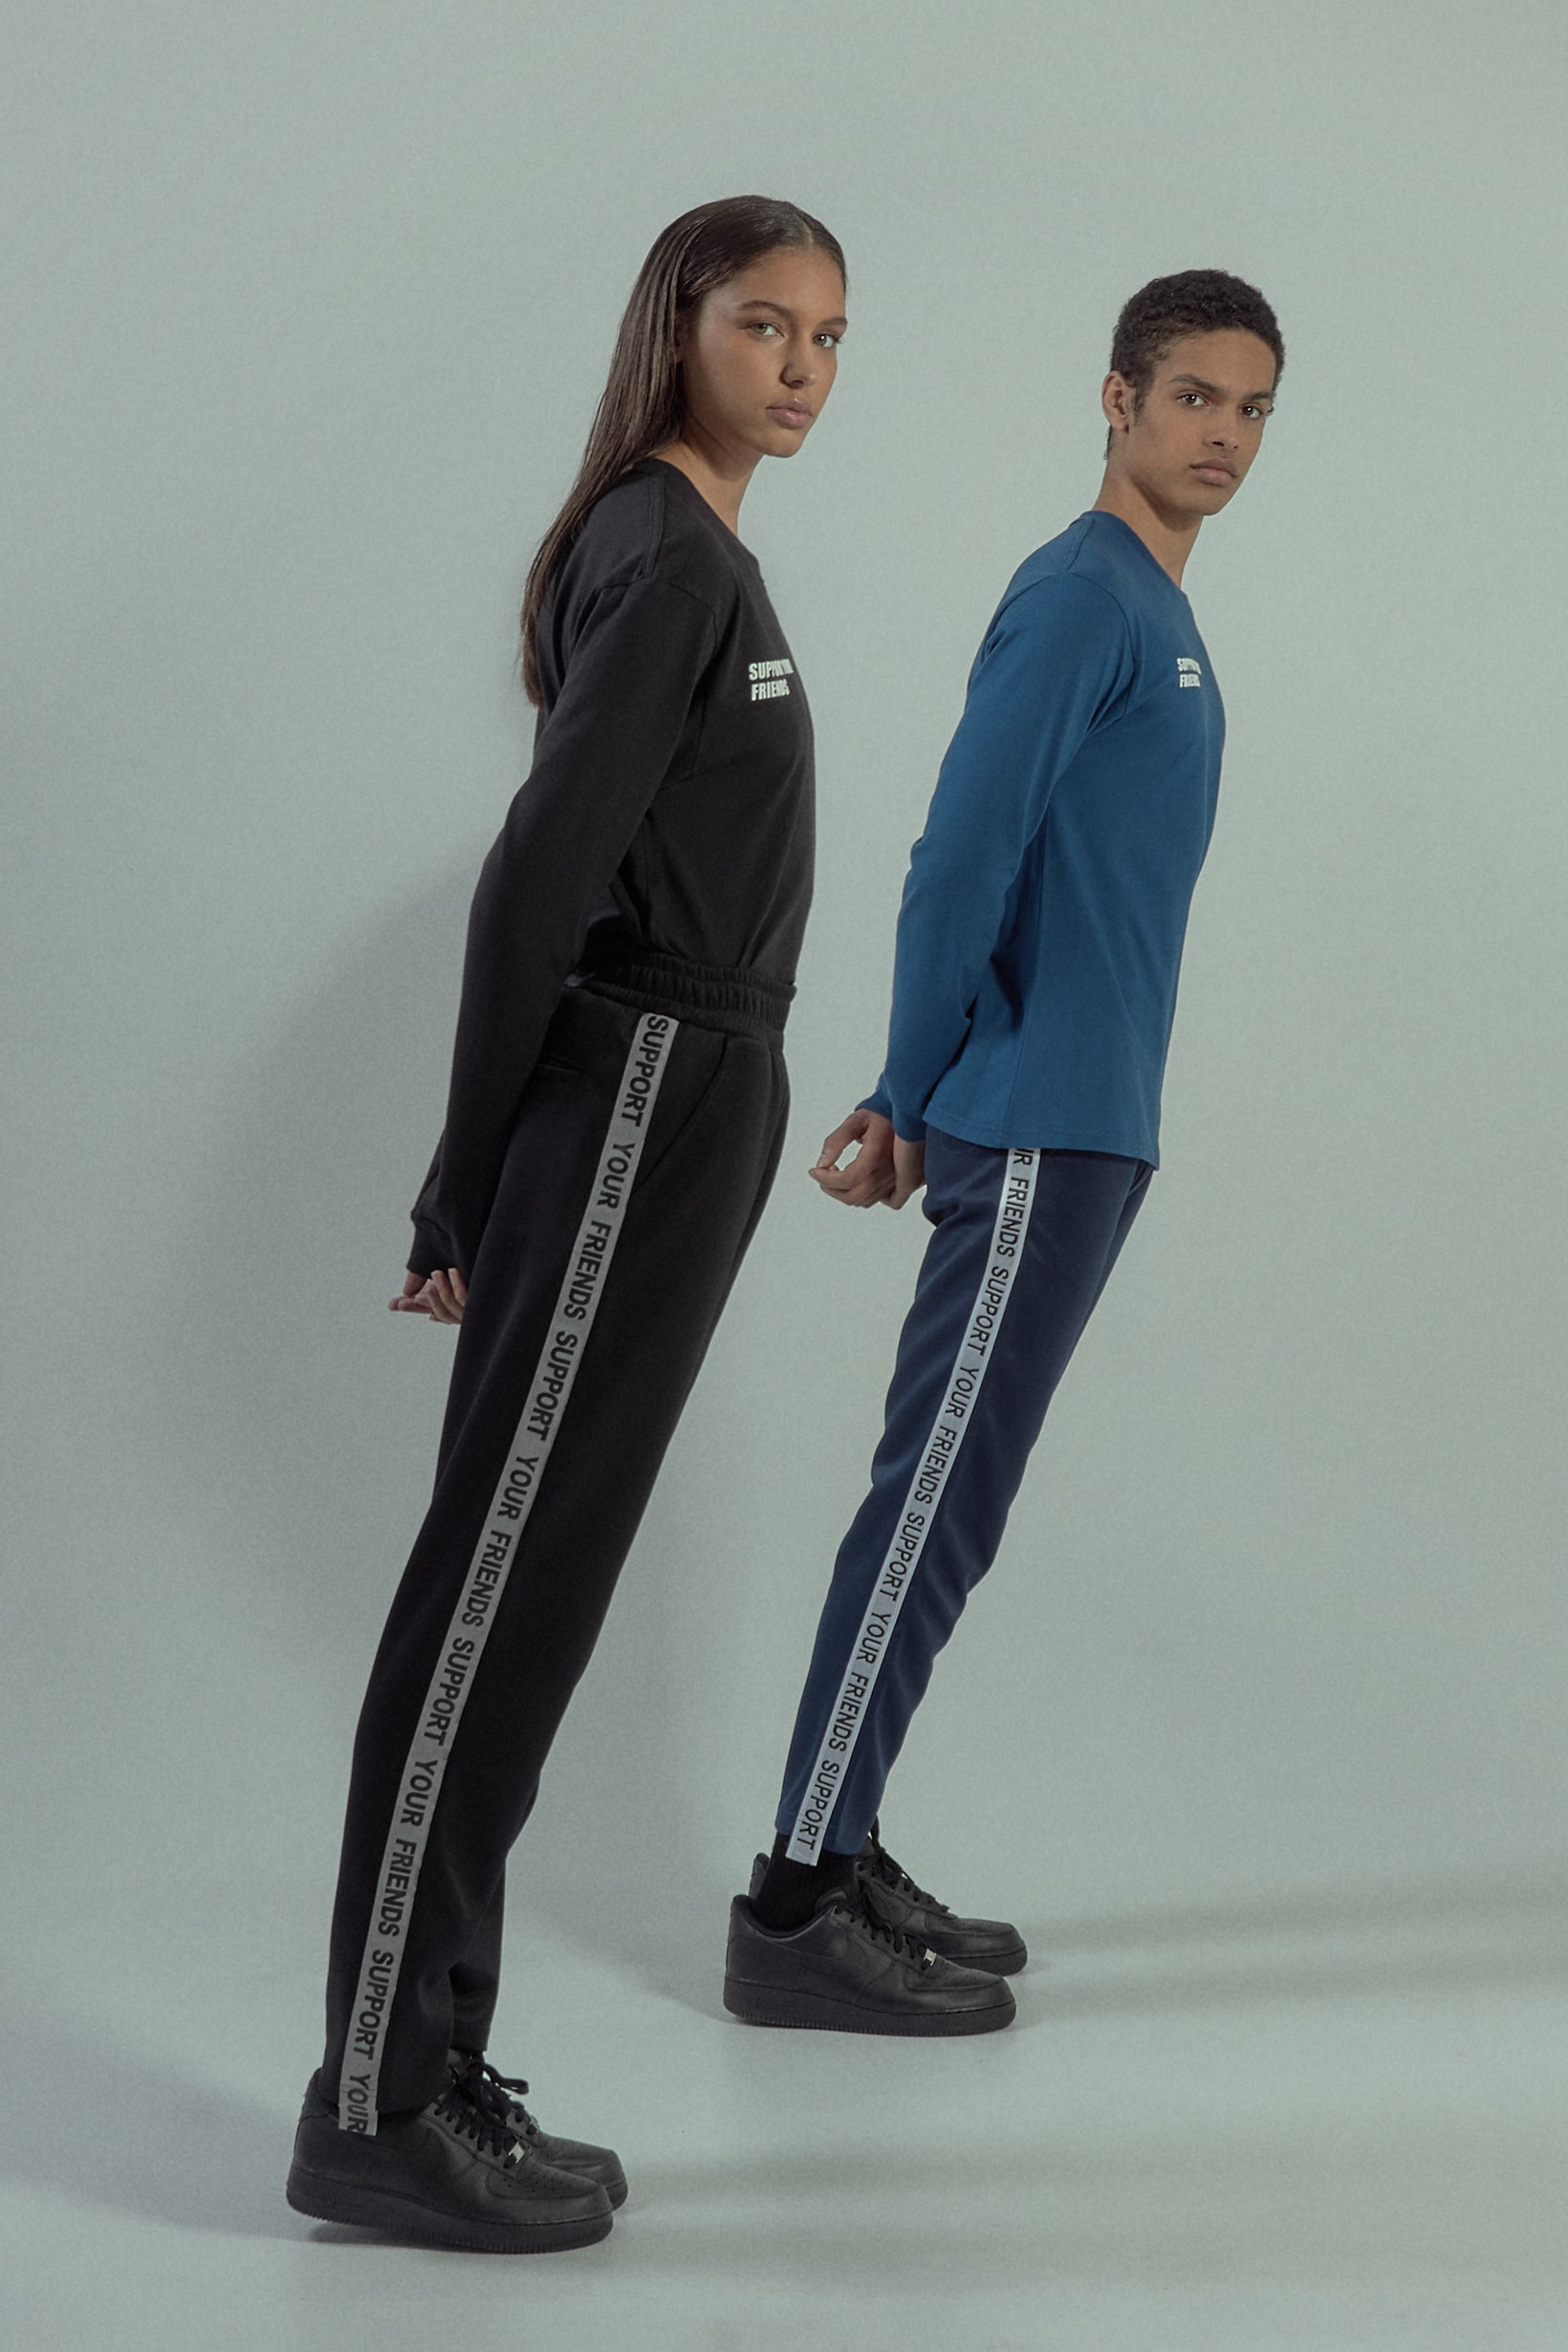 KROST Second Semester Collection Long Sleeved Shirts Track Pants Black Blue